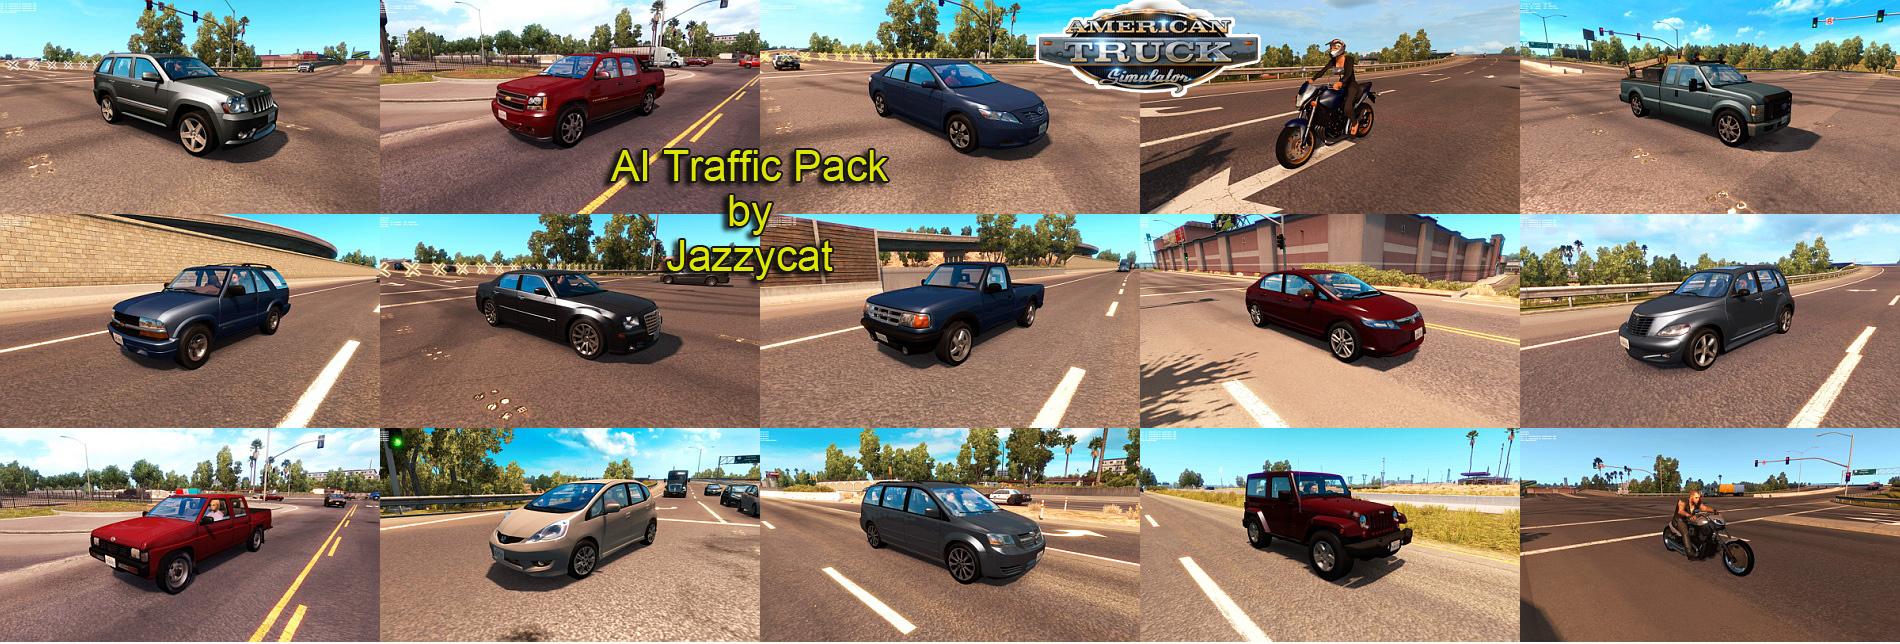 AI TRAFFIC PACK FOR BY JAZZYCAT V1.0